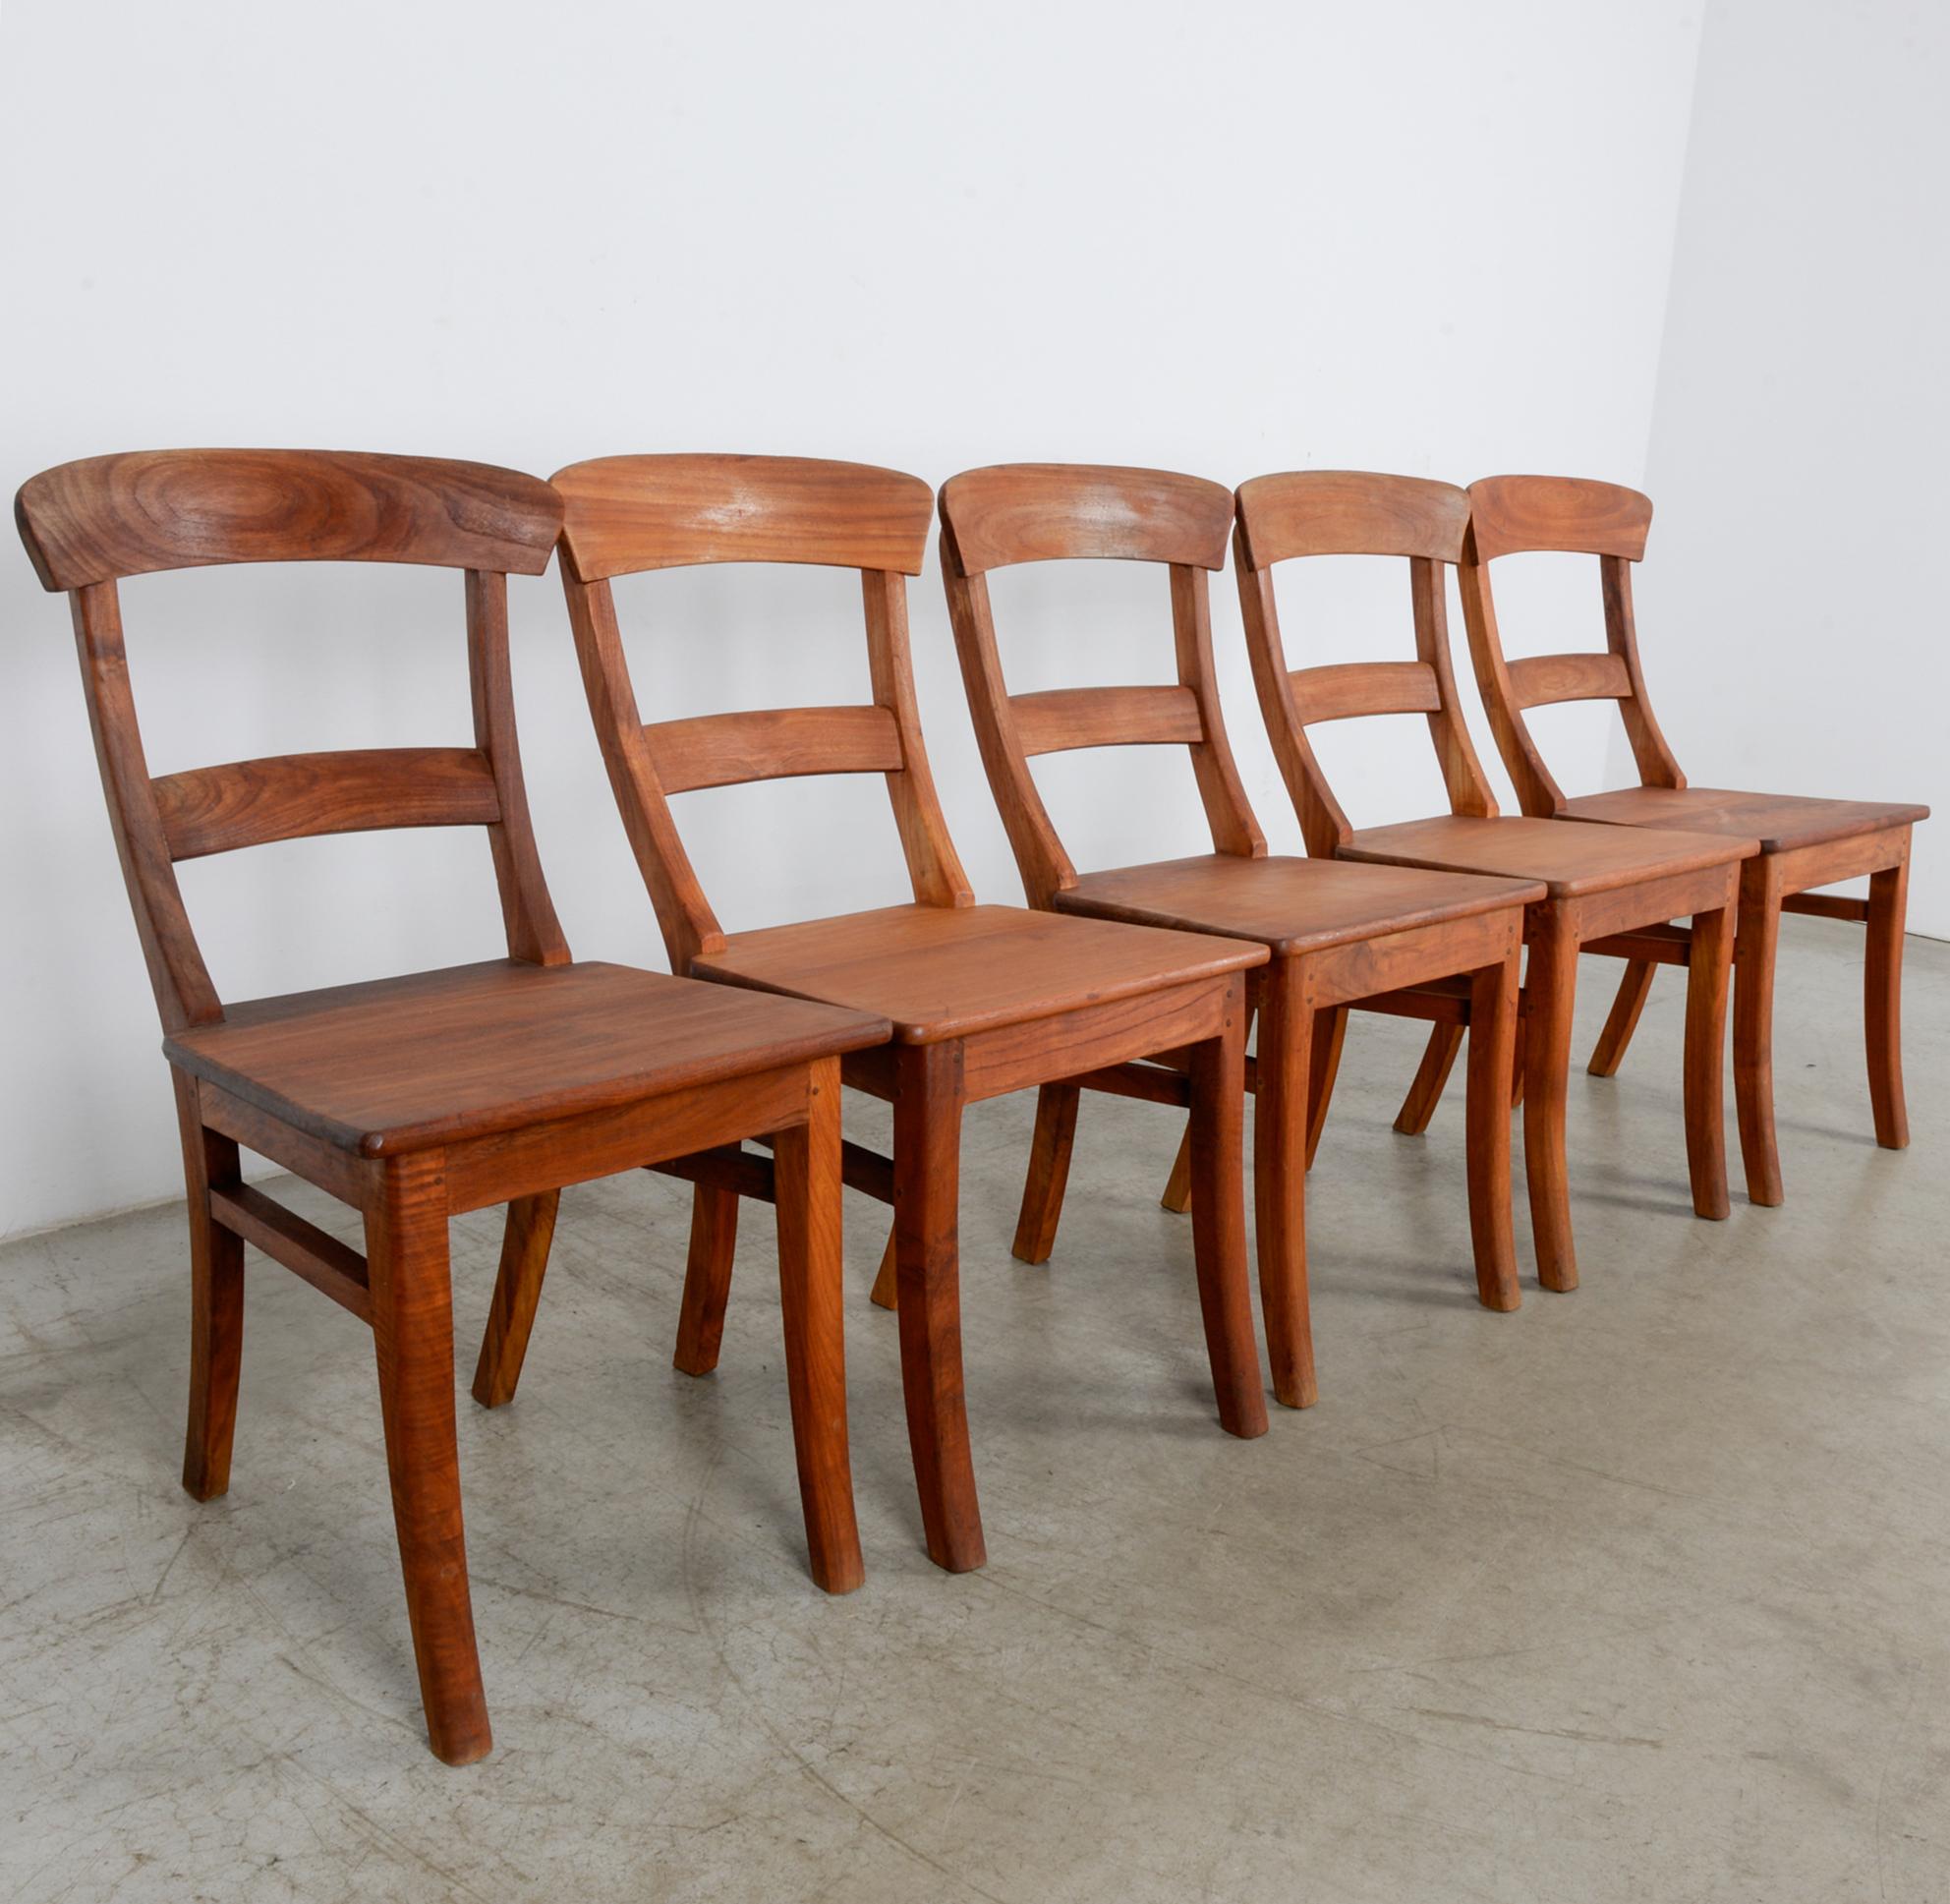 Wood Rustic European Dining Chairs, Set of Five